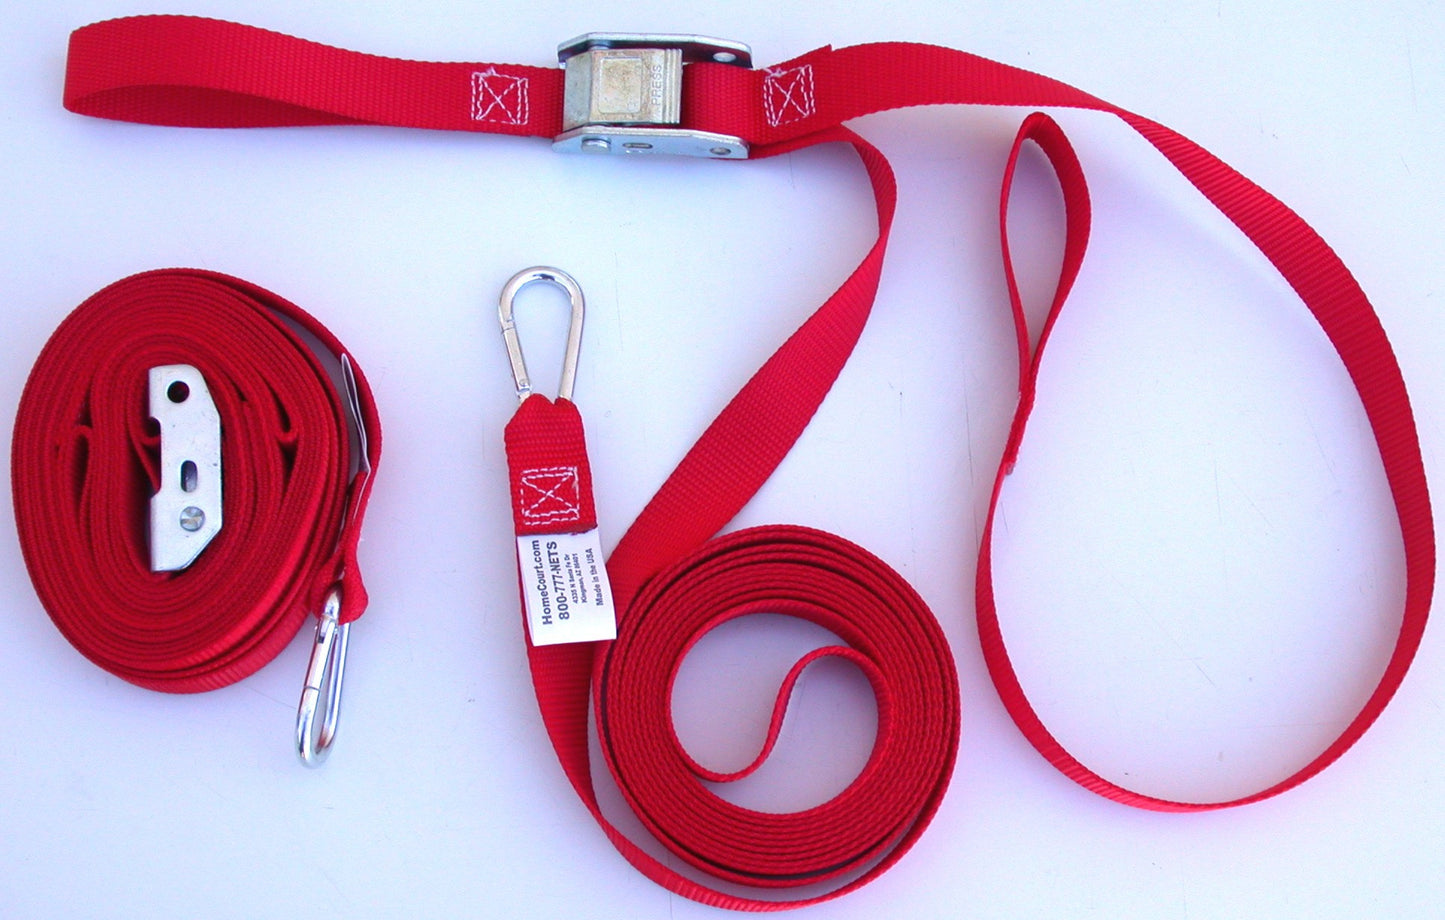 8LSLGS-pair of red 1-inch webbing ratchet-buckle guy lines spring snap connection